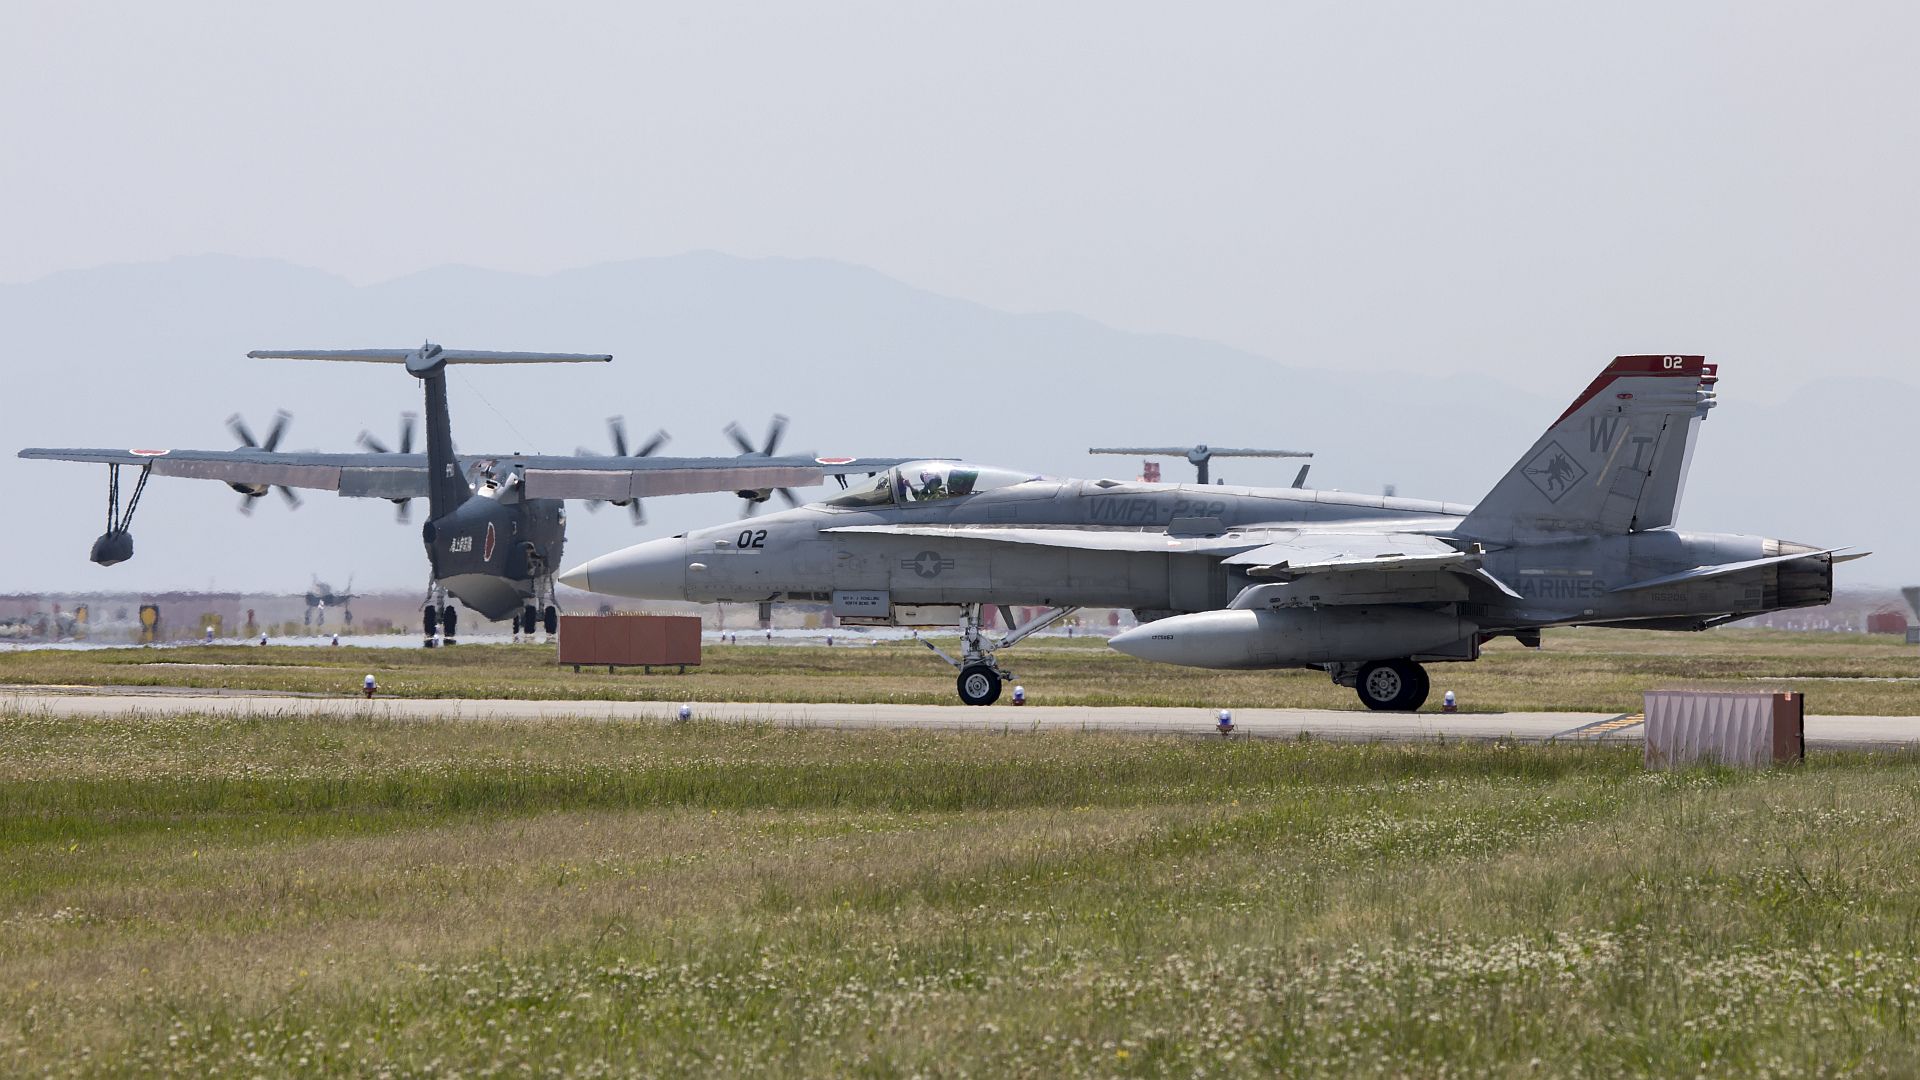 18C Hornet Aircraft With Marine Fighter Attack Squadron 232 Taxis The Runway During An Alert Contingency Marine Air Ground Task Force